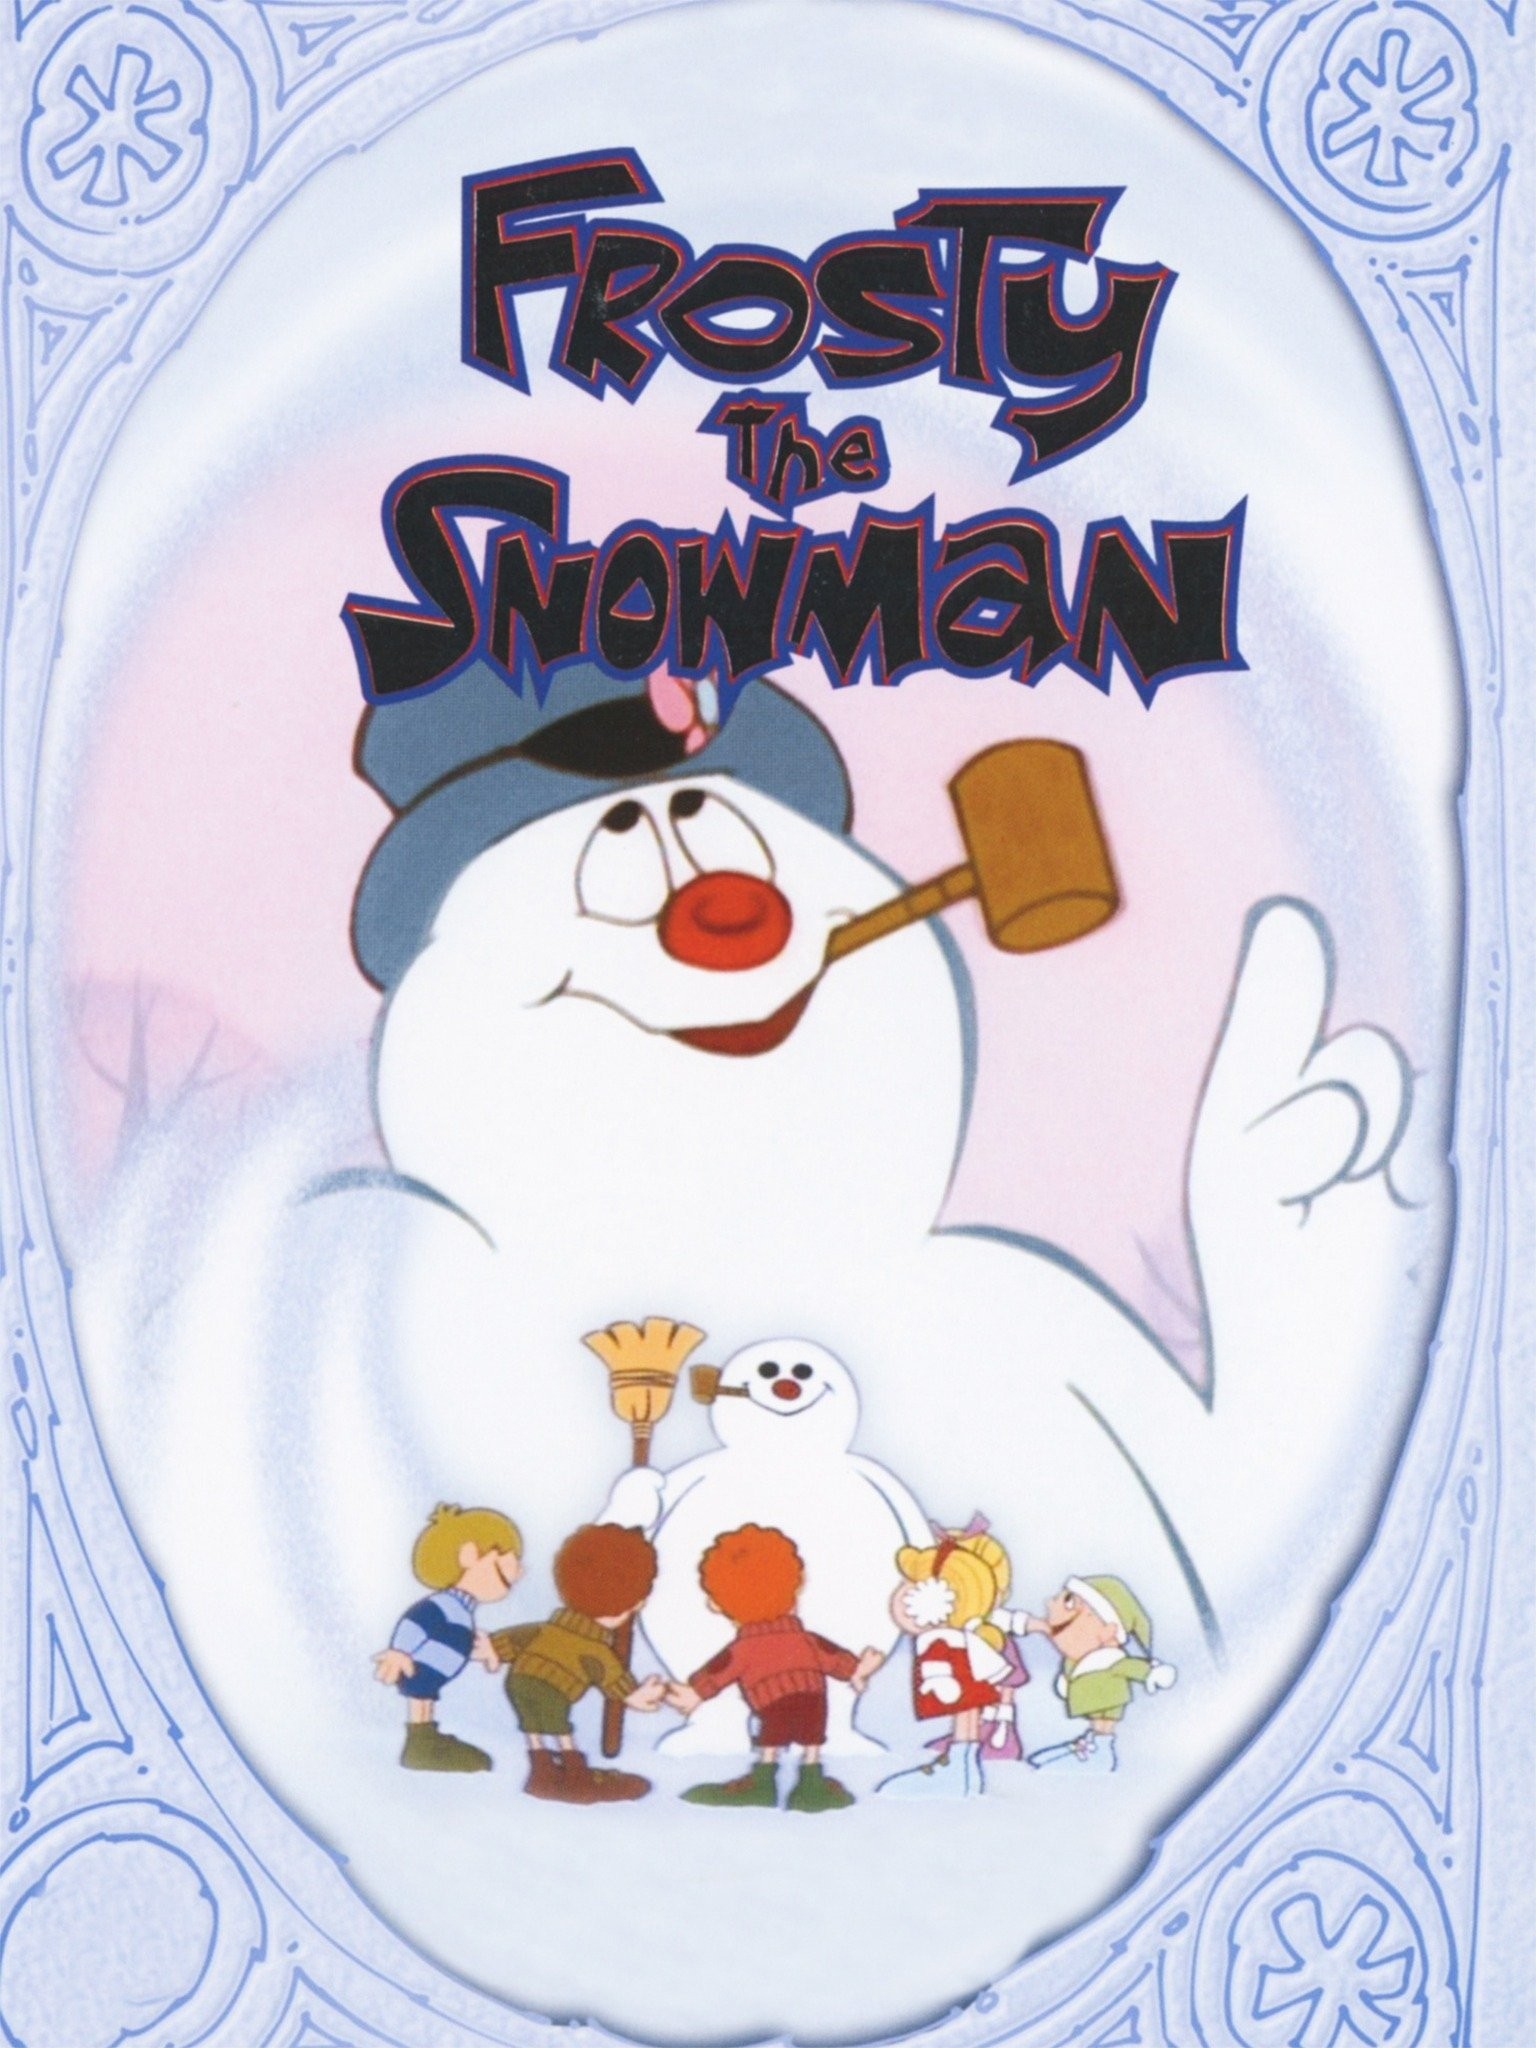 amit jalali recommends Watch Frosty The Snowman Online